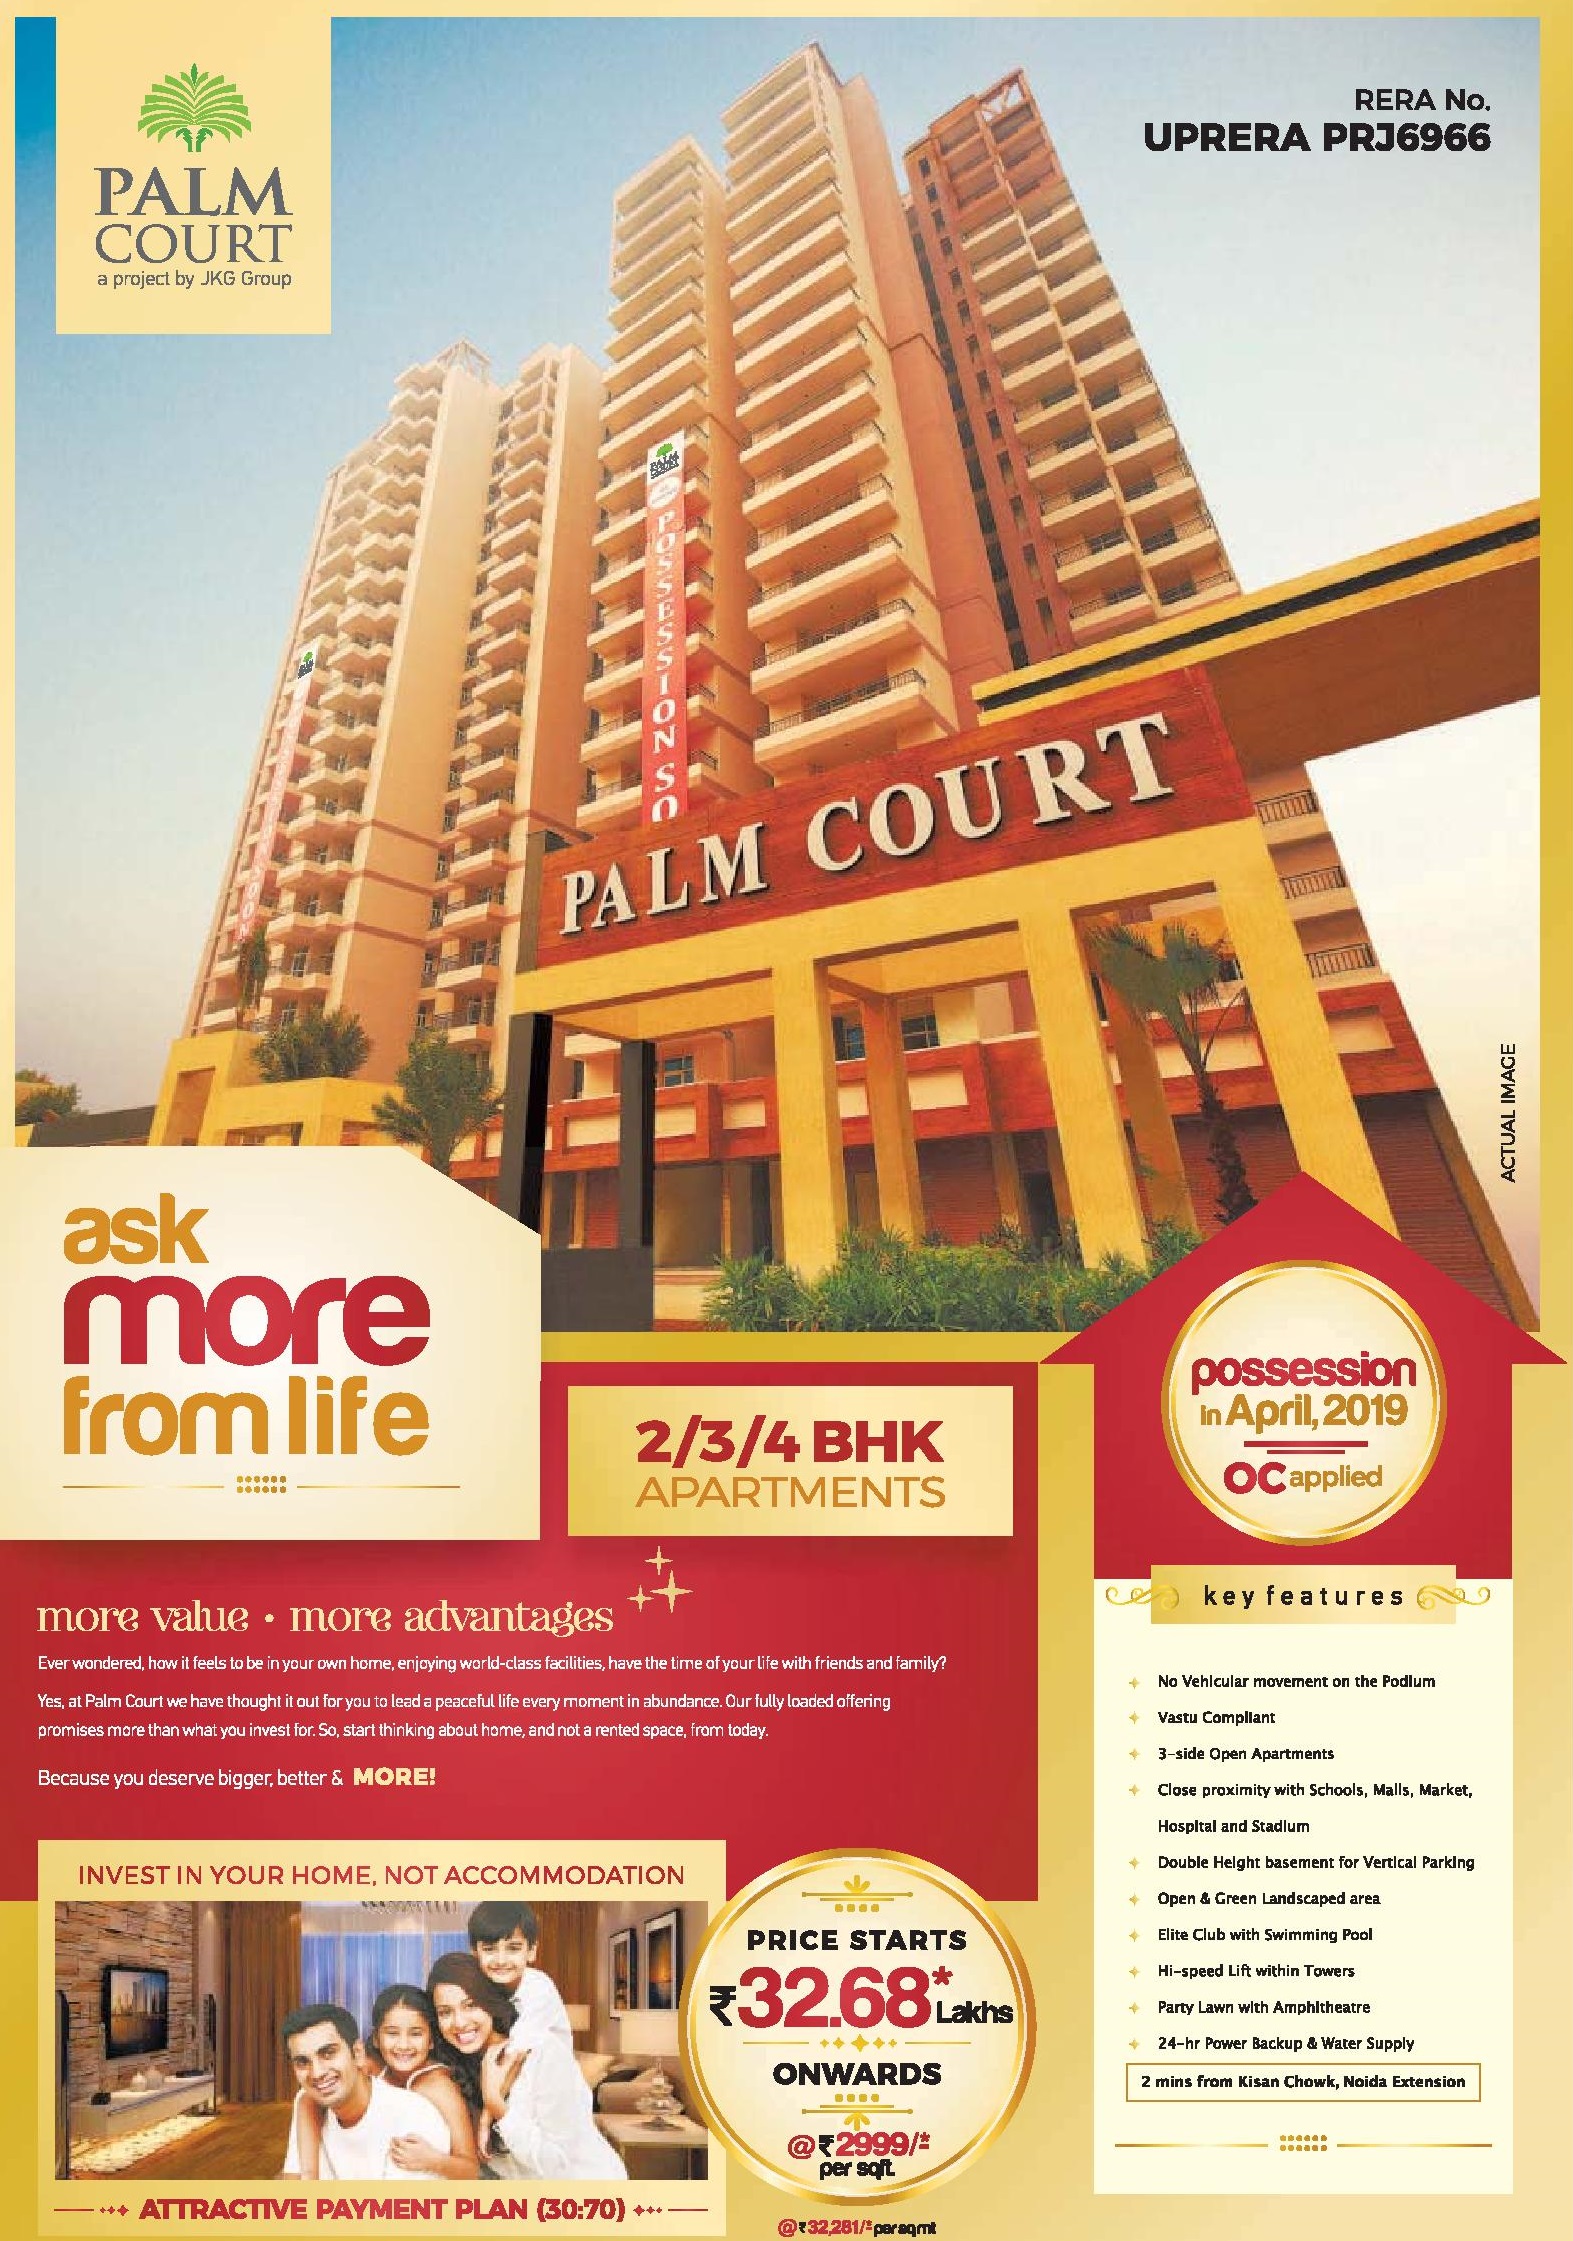 Book home @ Rs 2999 per sqft at JKG Palm Court in Greater Noida